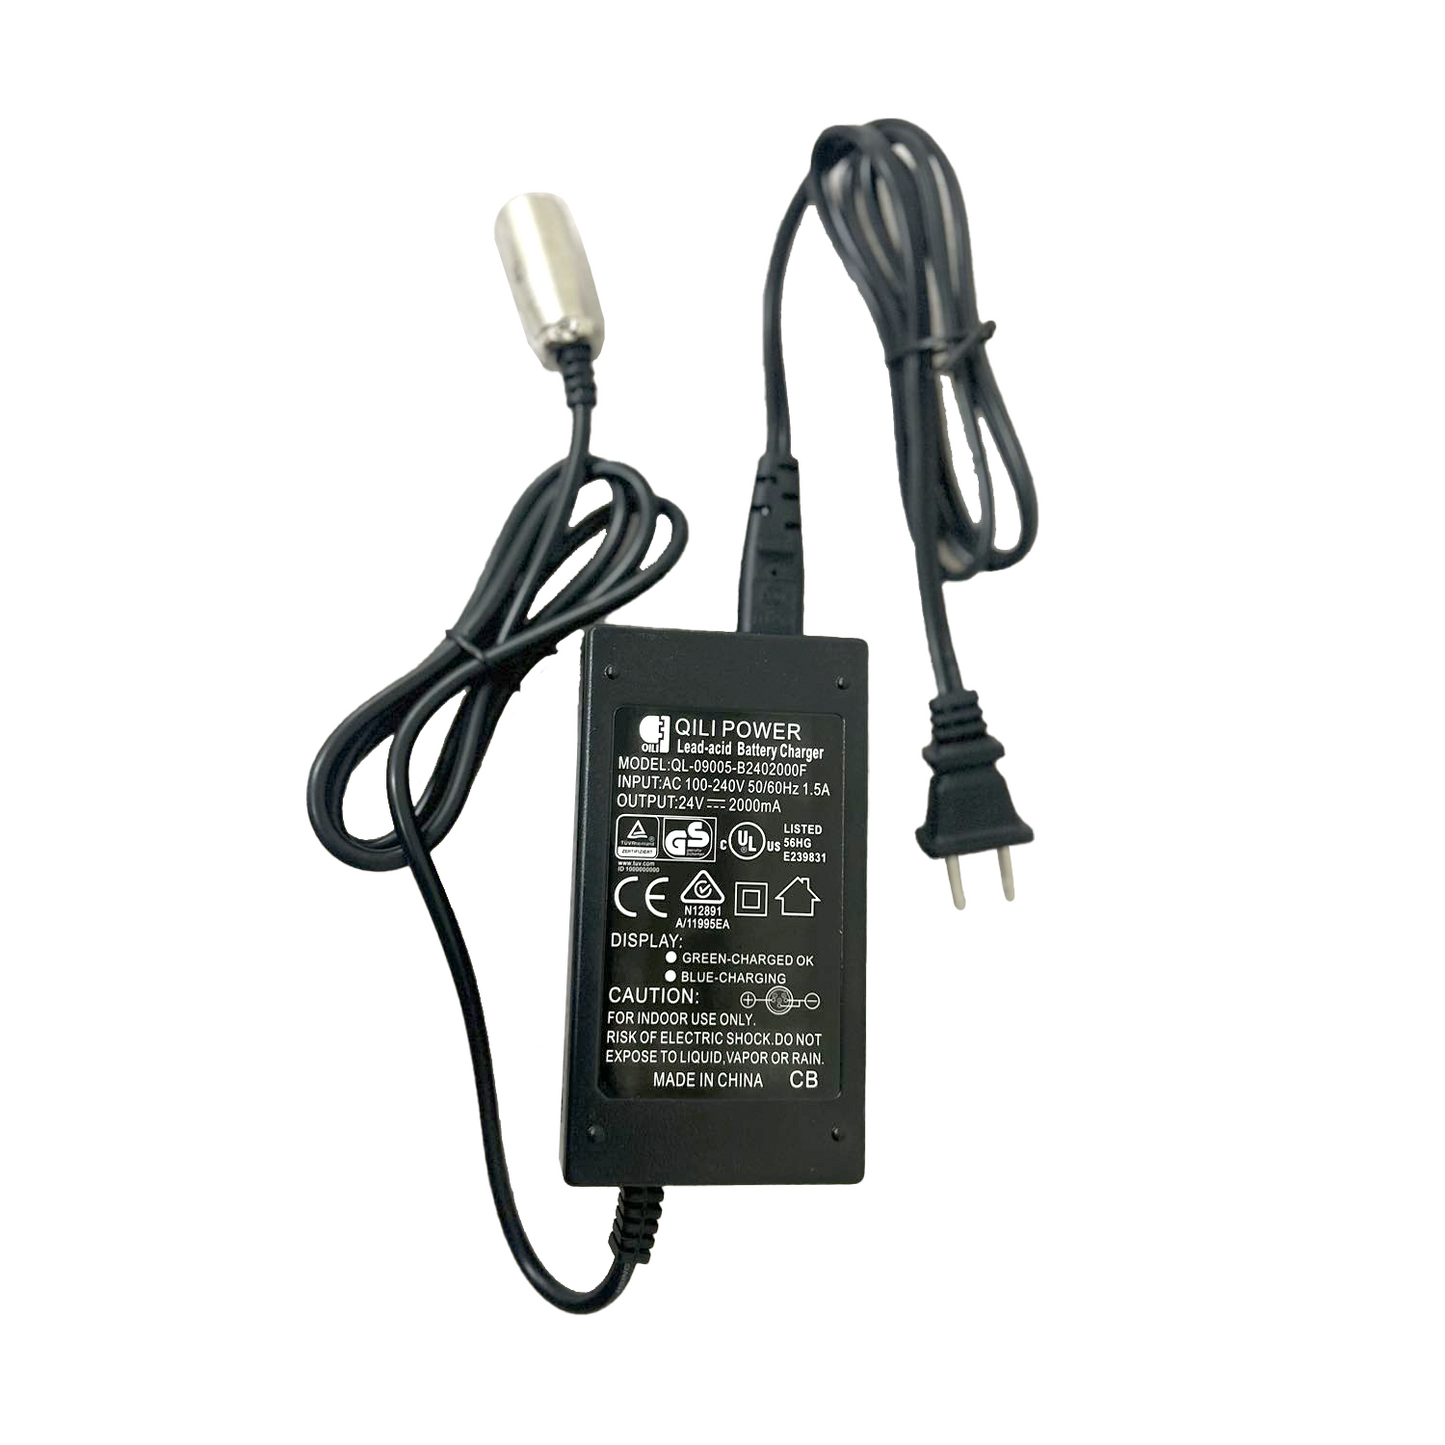 iCare® E610Max Battery Charger ONLY COMPATIBLE WITH E610Max